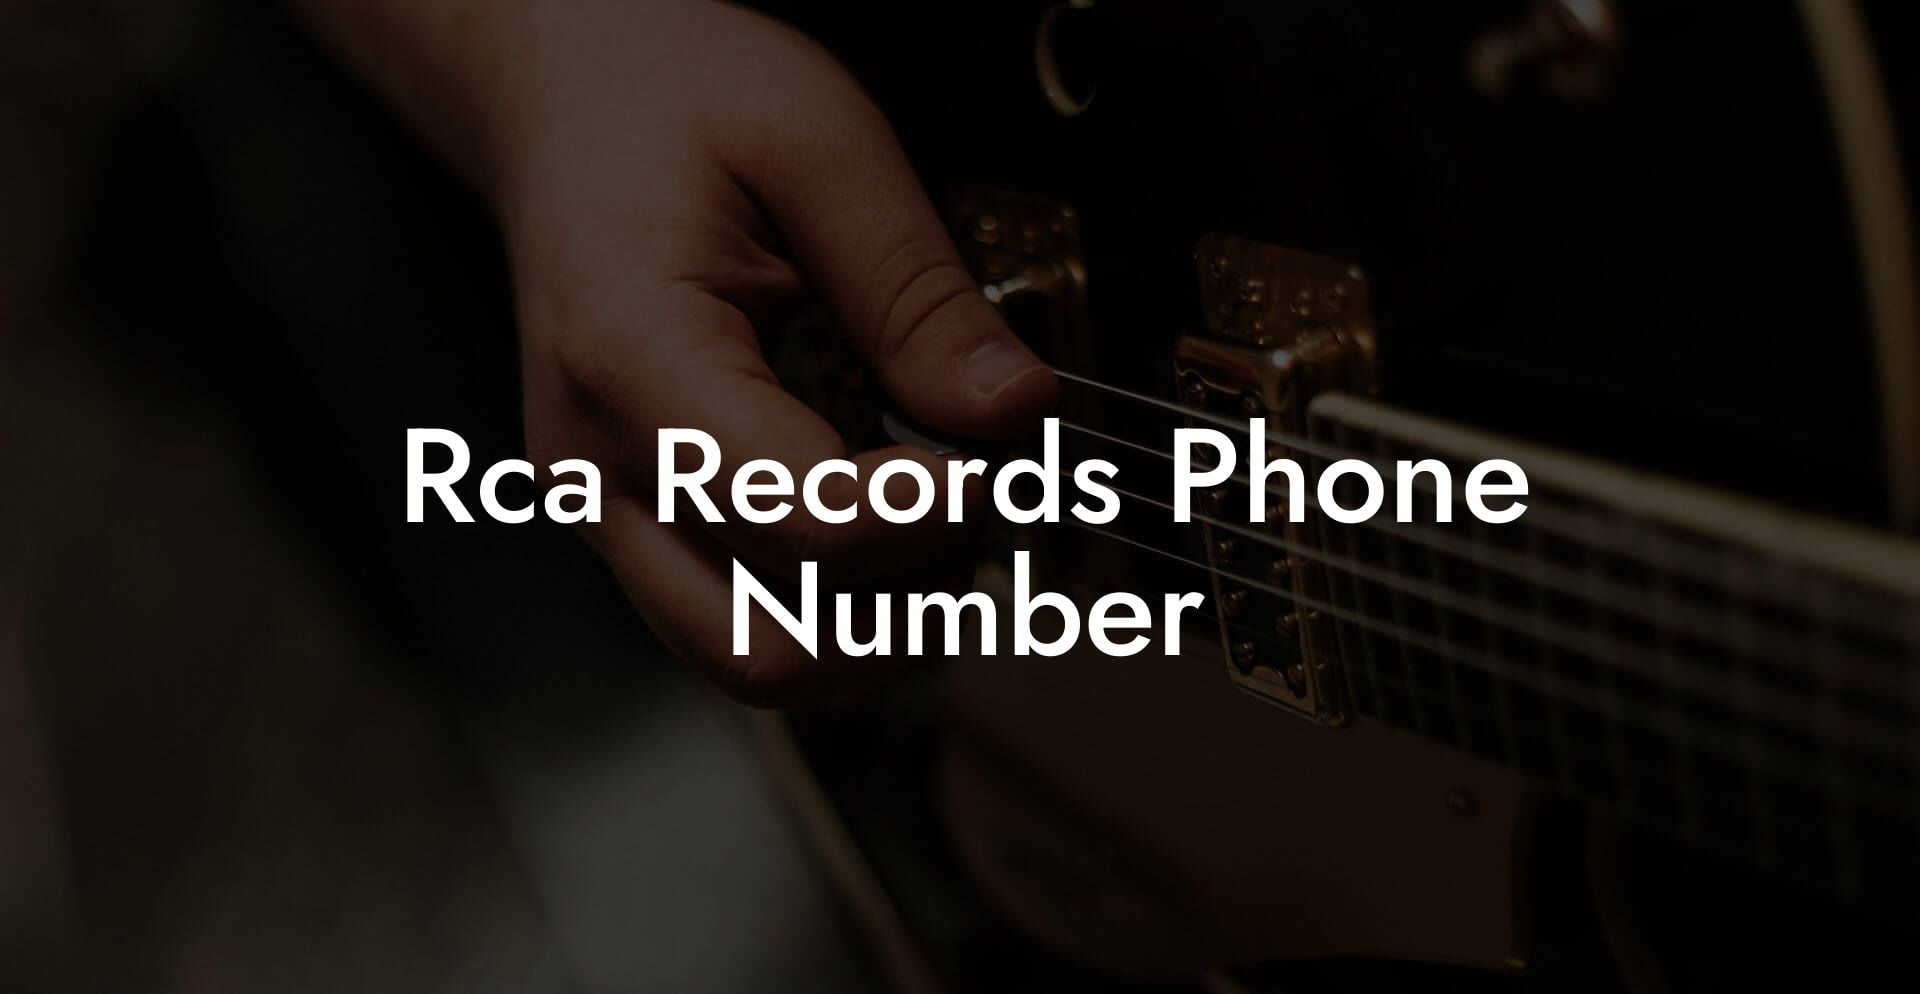 Rca Records Phone Number